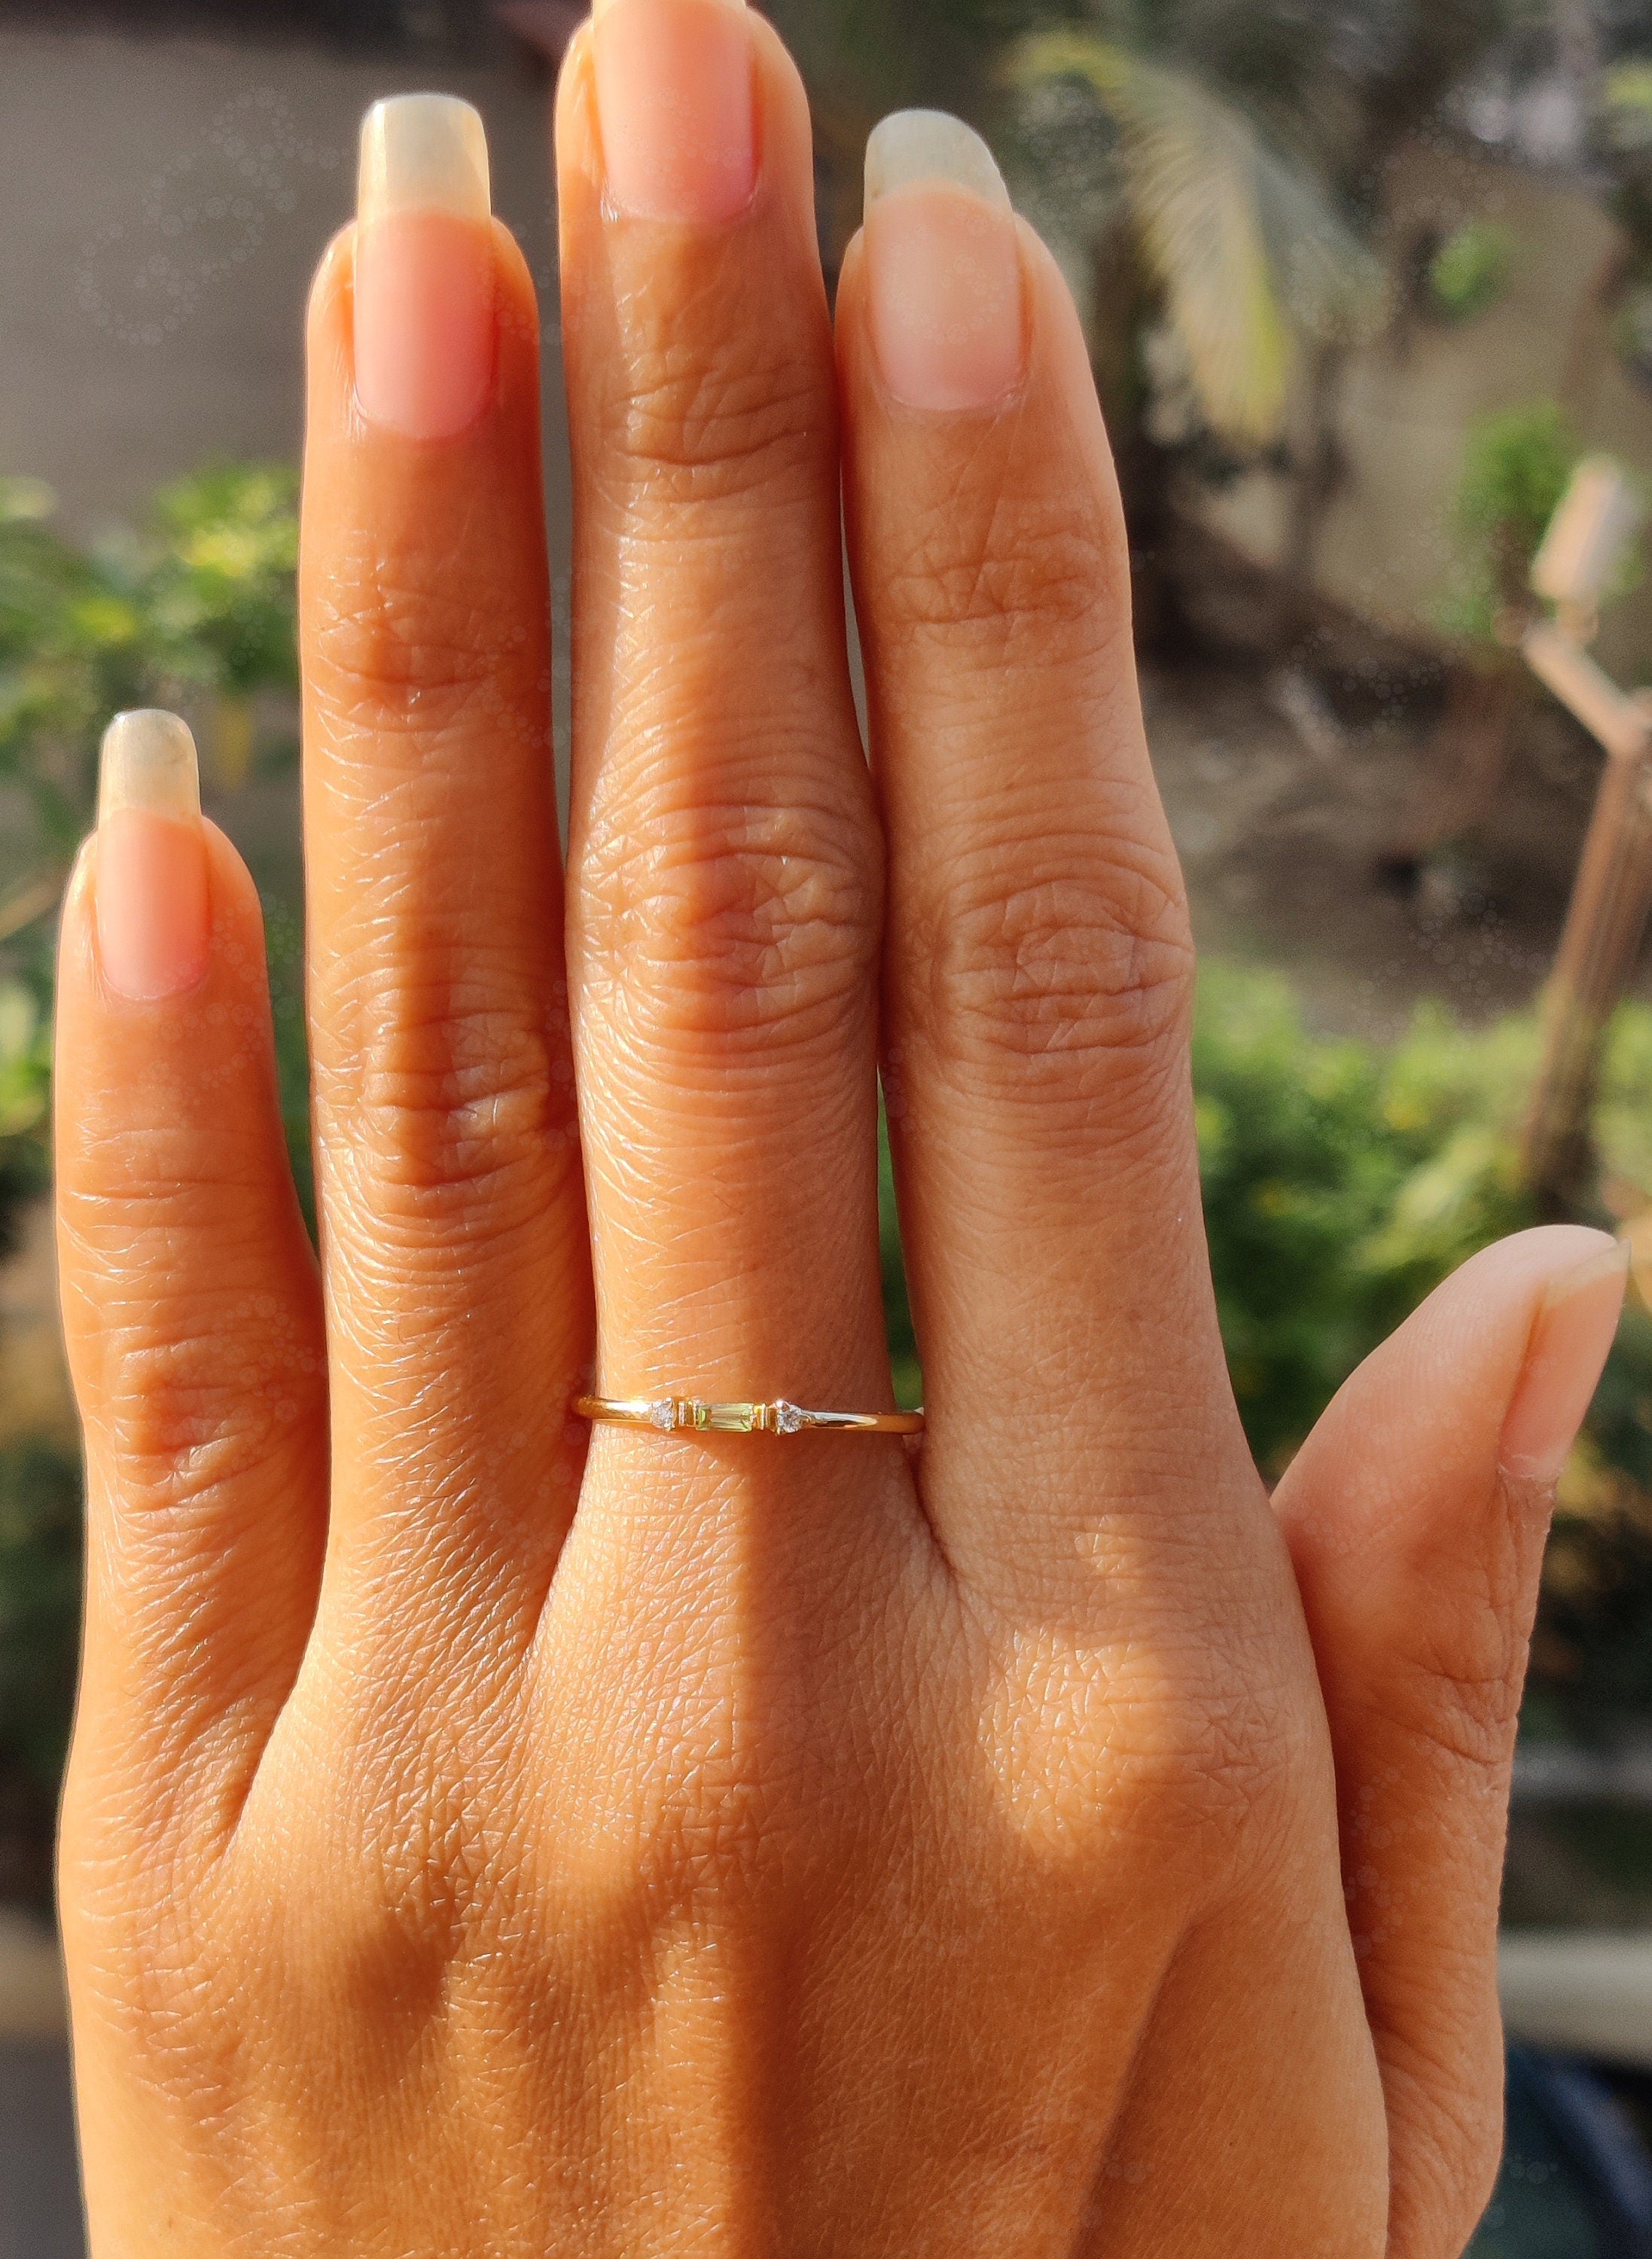 Stunning Stackable Birthstone Rings - Silver and Gold Baguette Peridot Stacking Beauty - Minimalist Three-Stone Dainty Ring